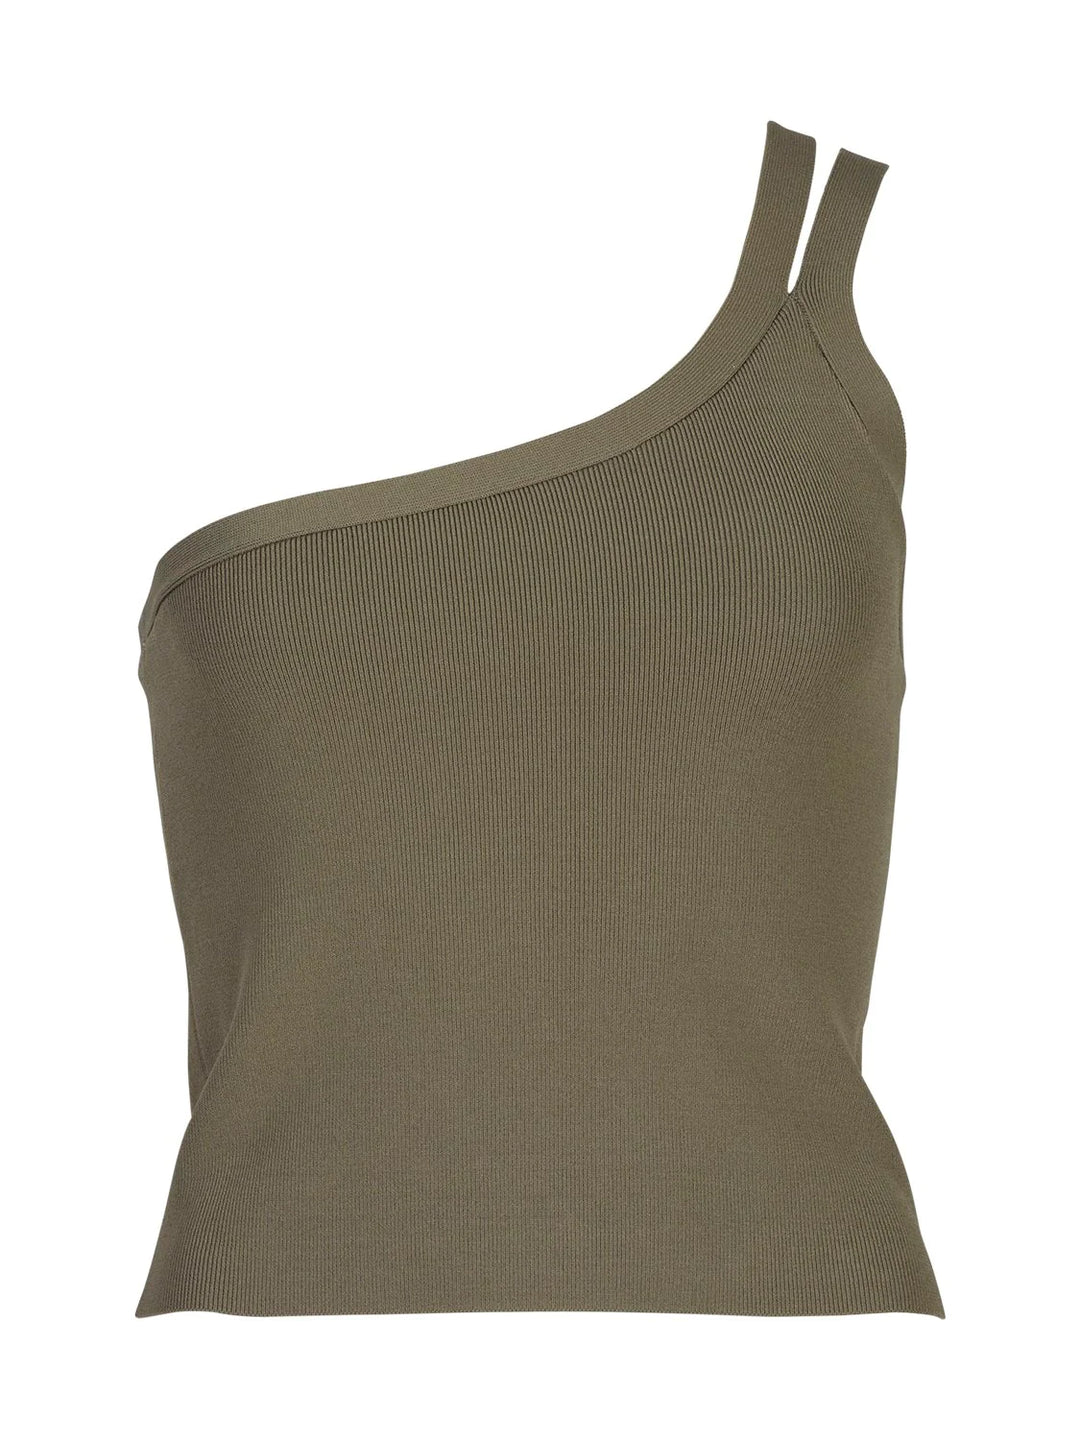 Ena Pelly Evie Luxe Assymetric Knit Tank - Olive